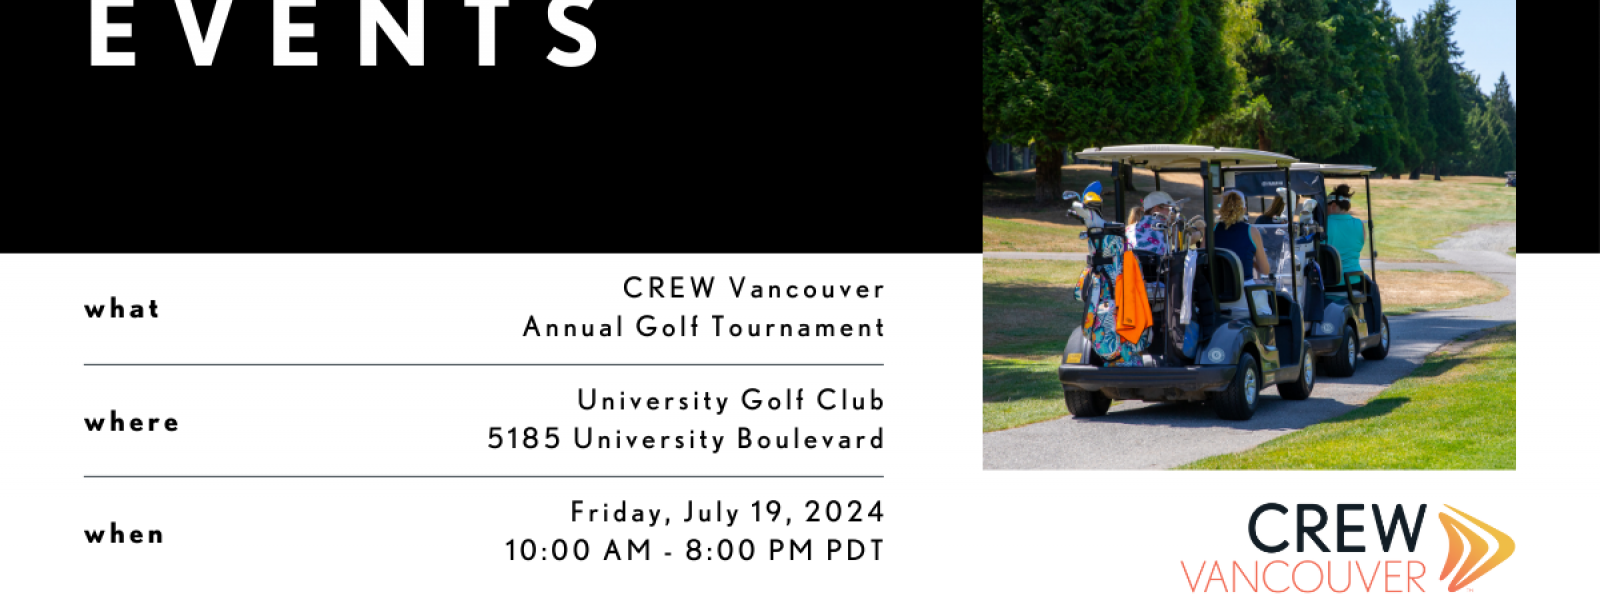 CREW Vancouver Event Golf save the date LT